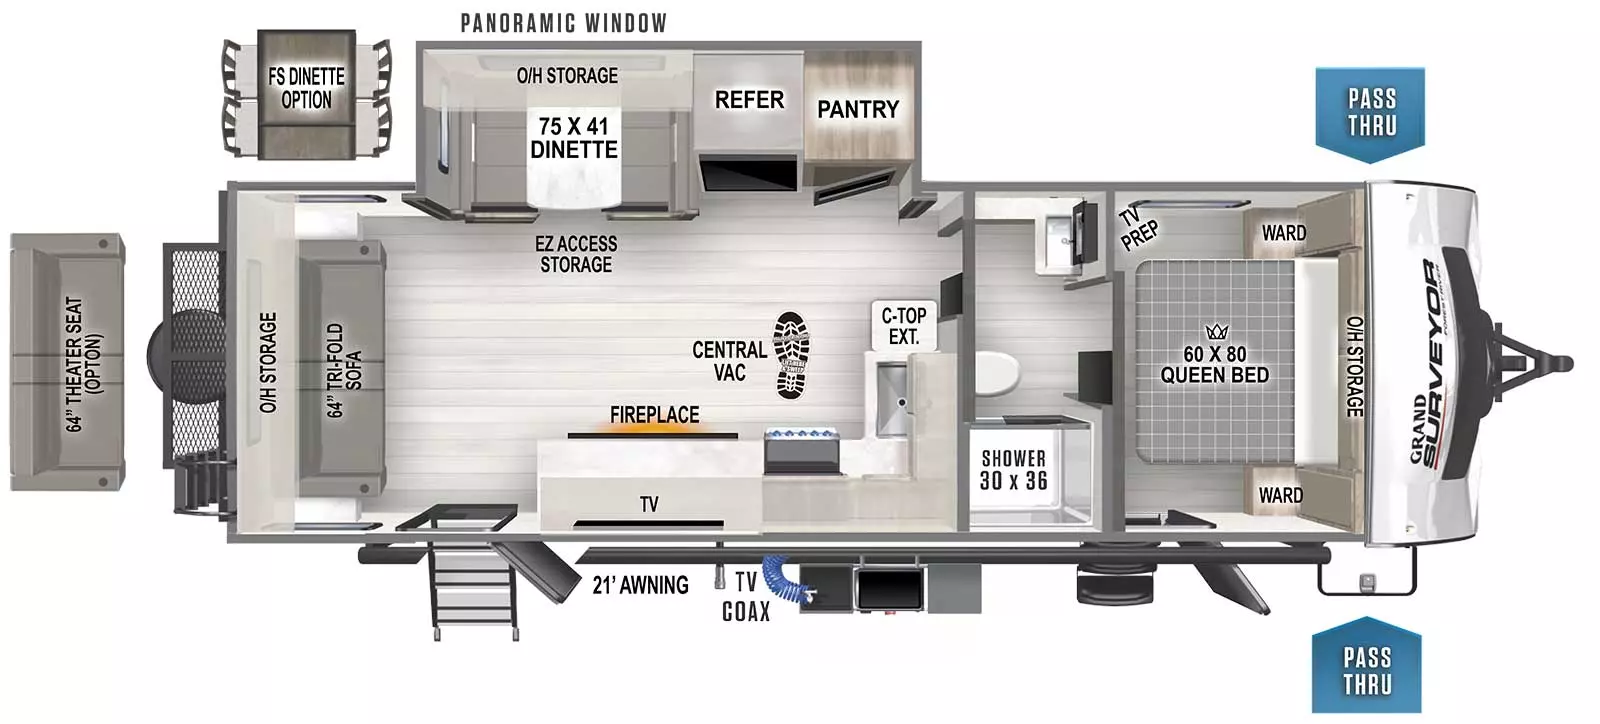 The 253RLS has one entry door, an outside kitchen, front passthrough storage, one off-door side slideout, TV Coax connection, and 21' awning on the exterior. Layout front to back: Front bedroom with queen bed, wardrobes on either side, overhead storage and TV prep; bathroom with doors entering to bedroom or living area; off-door side slideout with pantry, refrigerator, dinette with EZ access storage, overhead storage and panoramic window; door side kitchen with sink, overhead cabinets, stove, microwave, countertop extension, TV and fireplace, and entry door; rear of the RV features tri-fold sofa with overhead storage. This floorplan also features a central vacuum system.